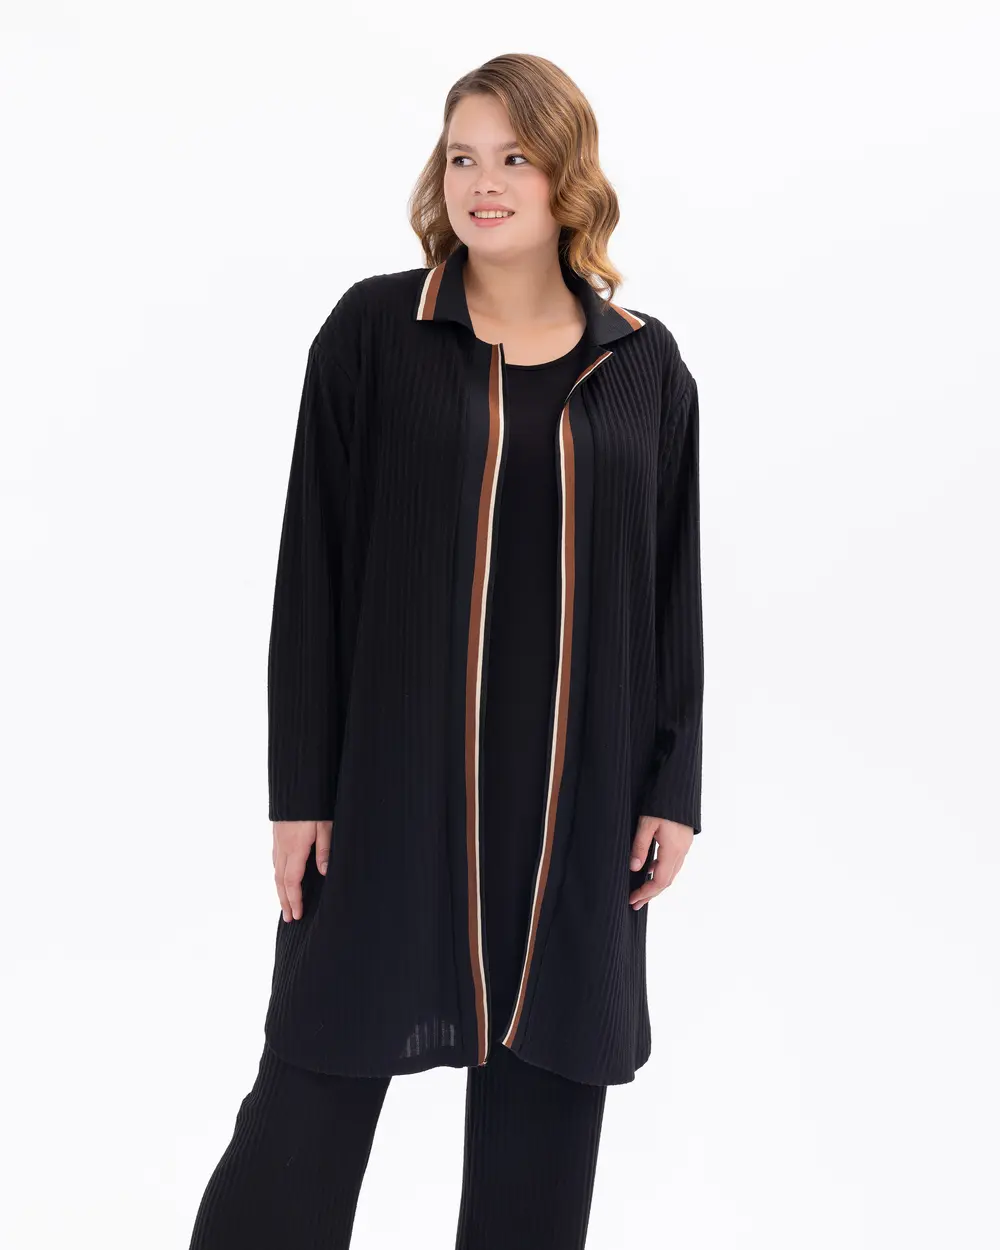 Plus-Size Ribbed Jacket with Inner Blouse